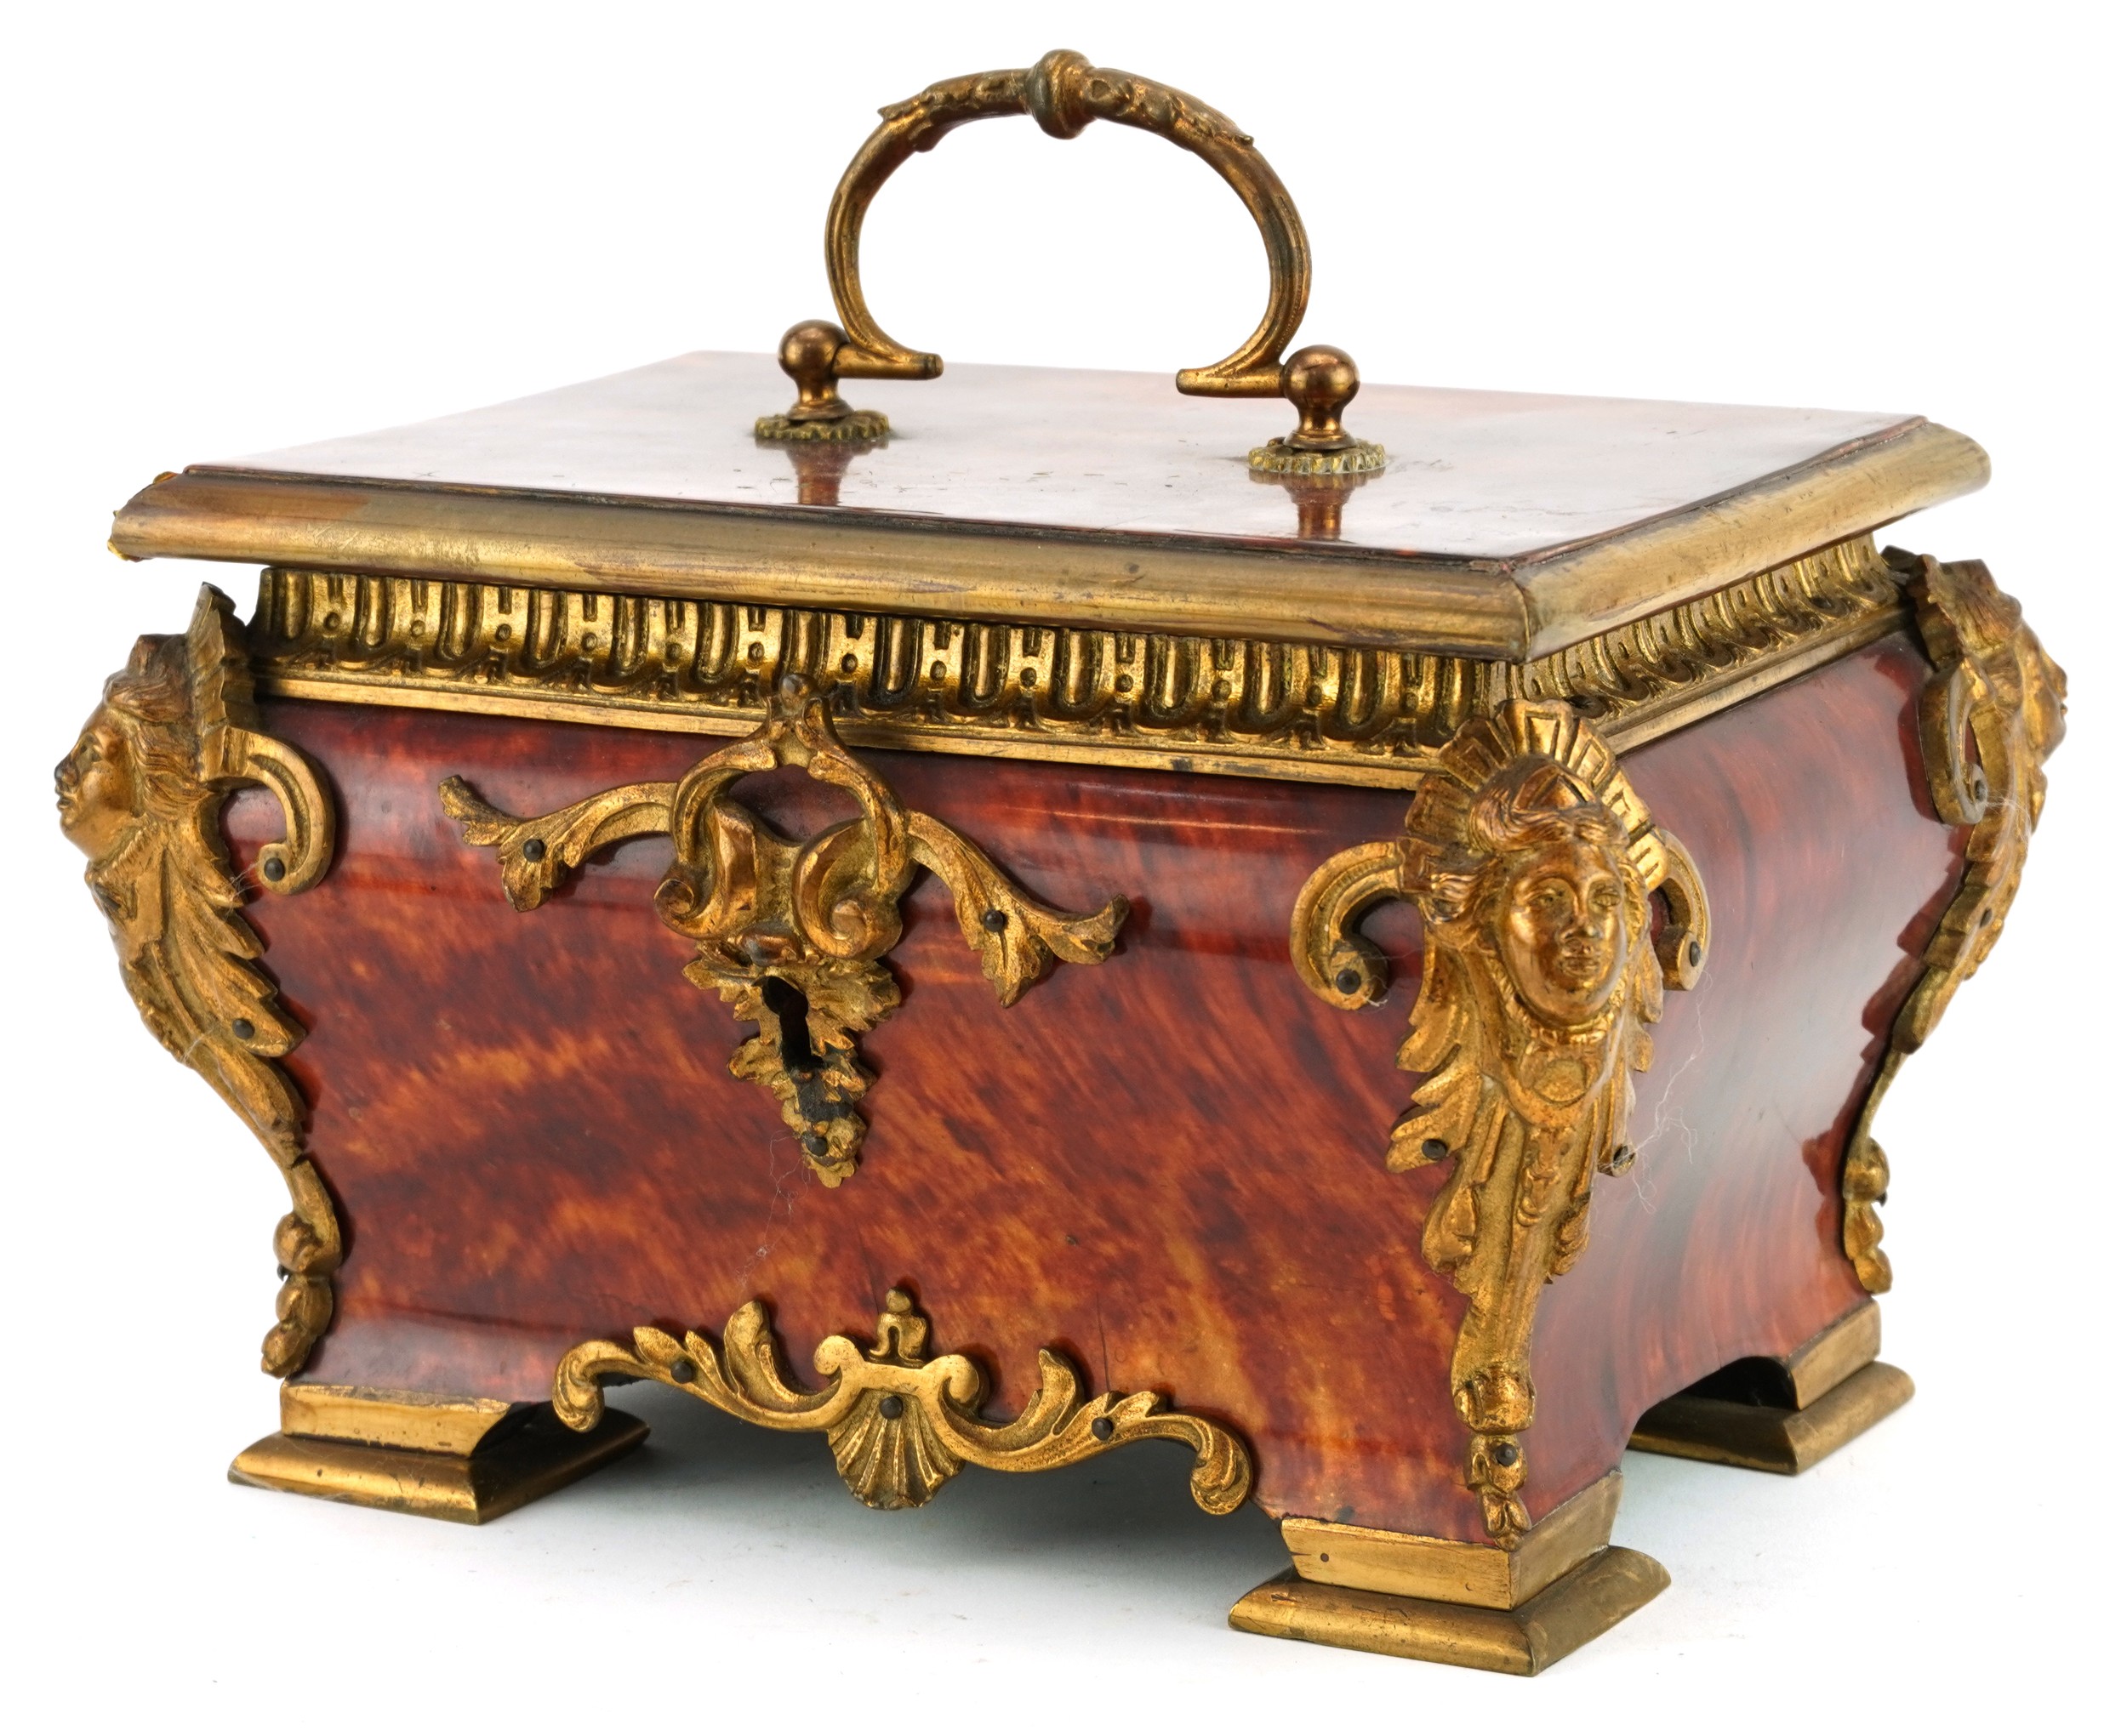 French Napoleon III tortoiseshell coffin casket with ormolu figural and floral mounts, 15cm H x 22cm